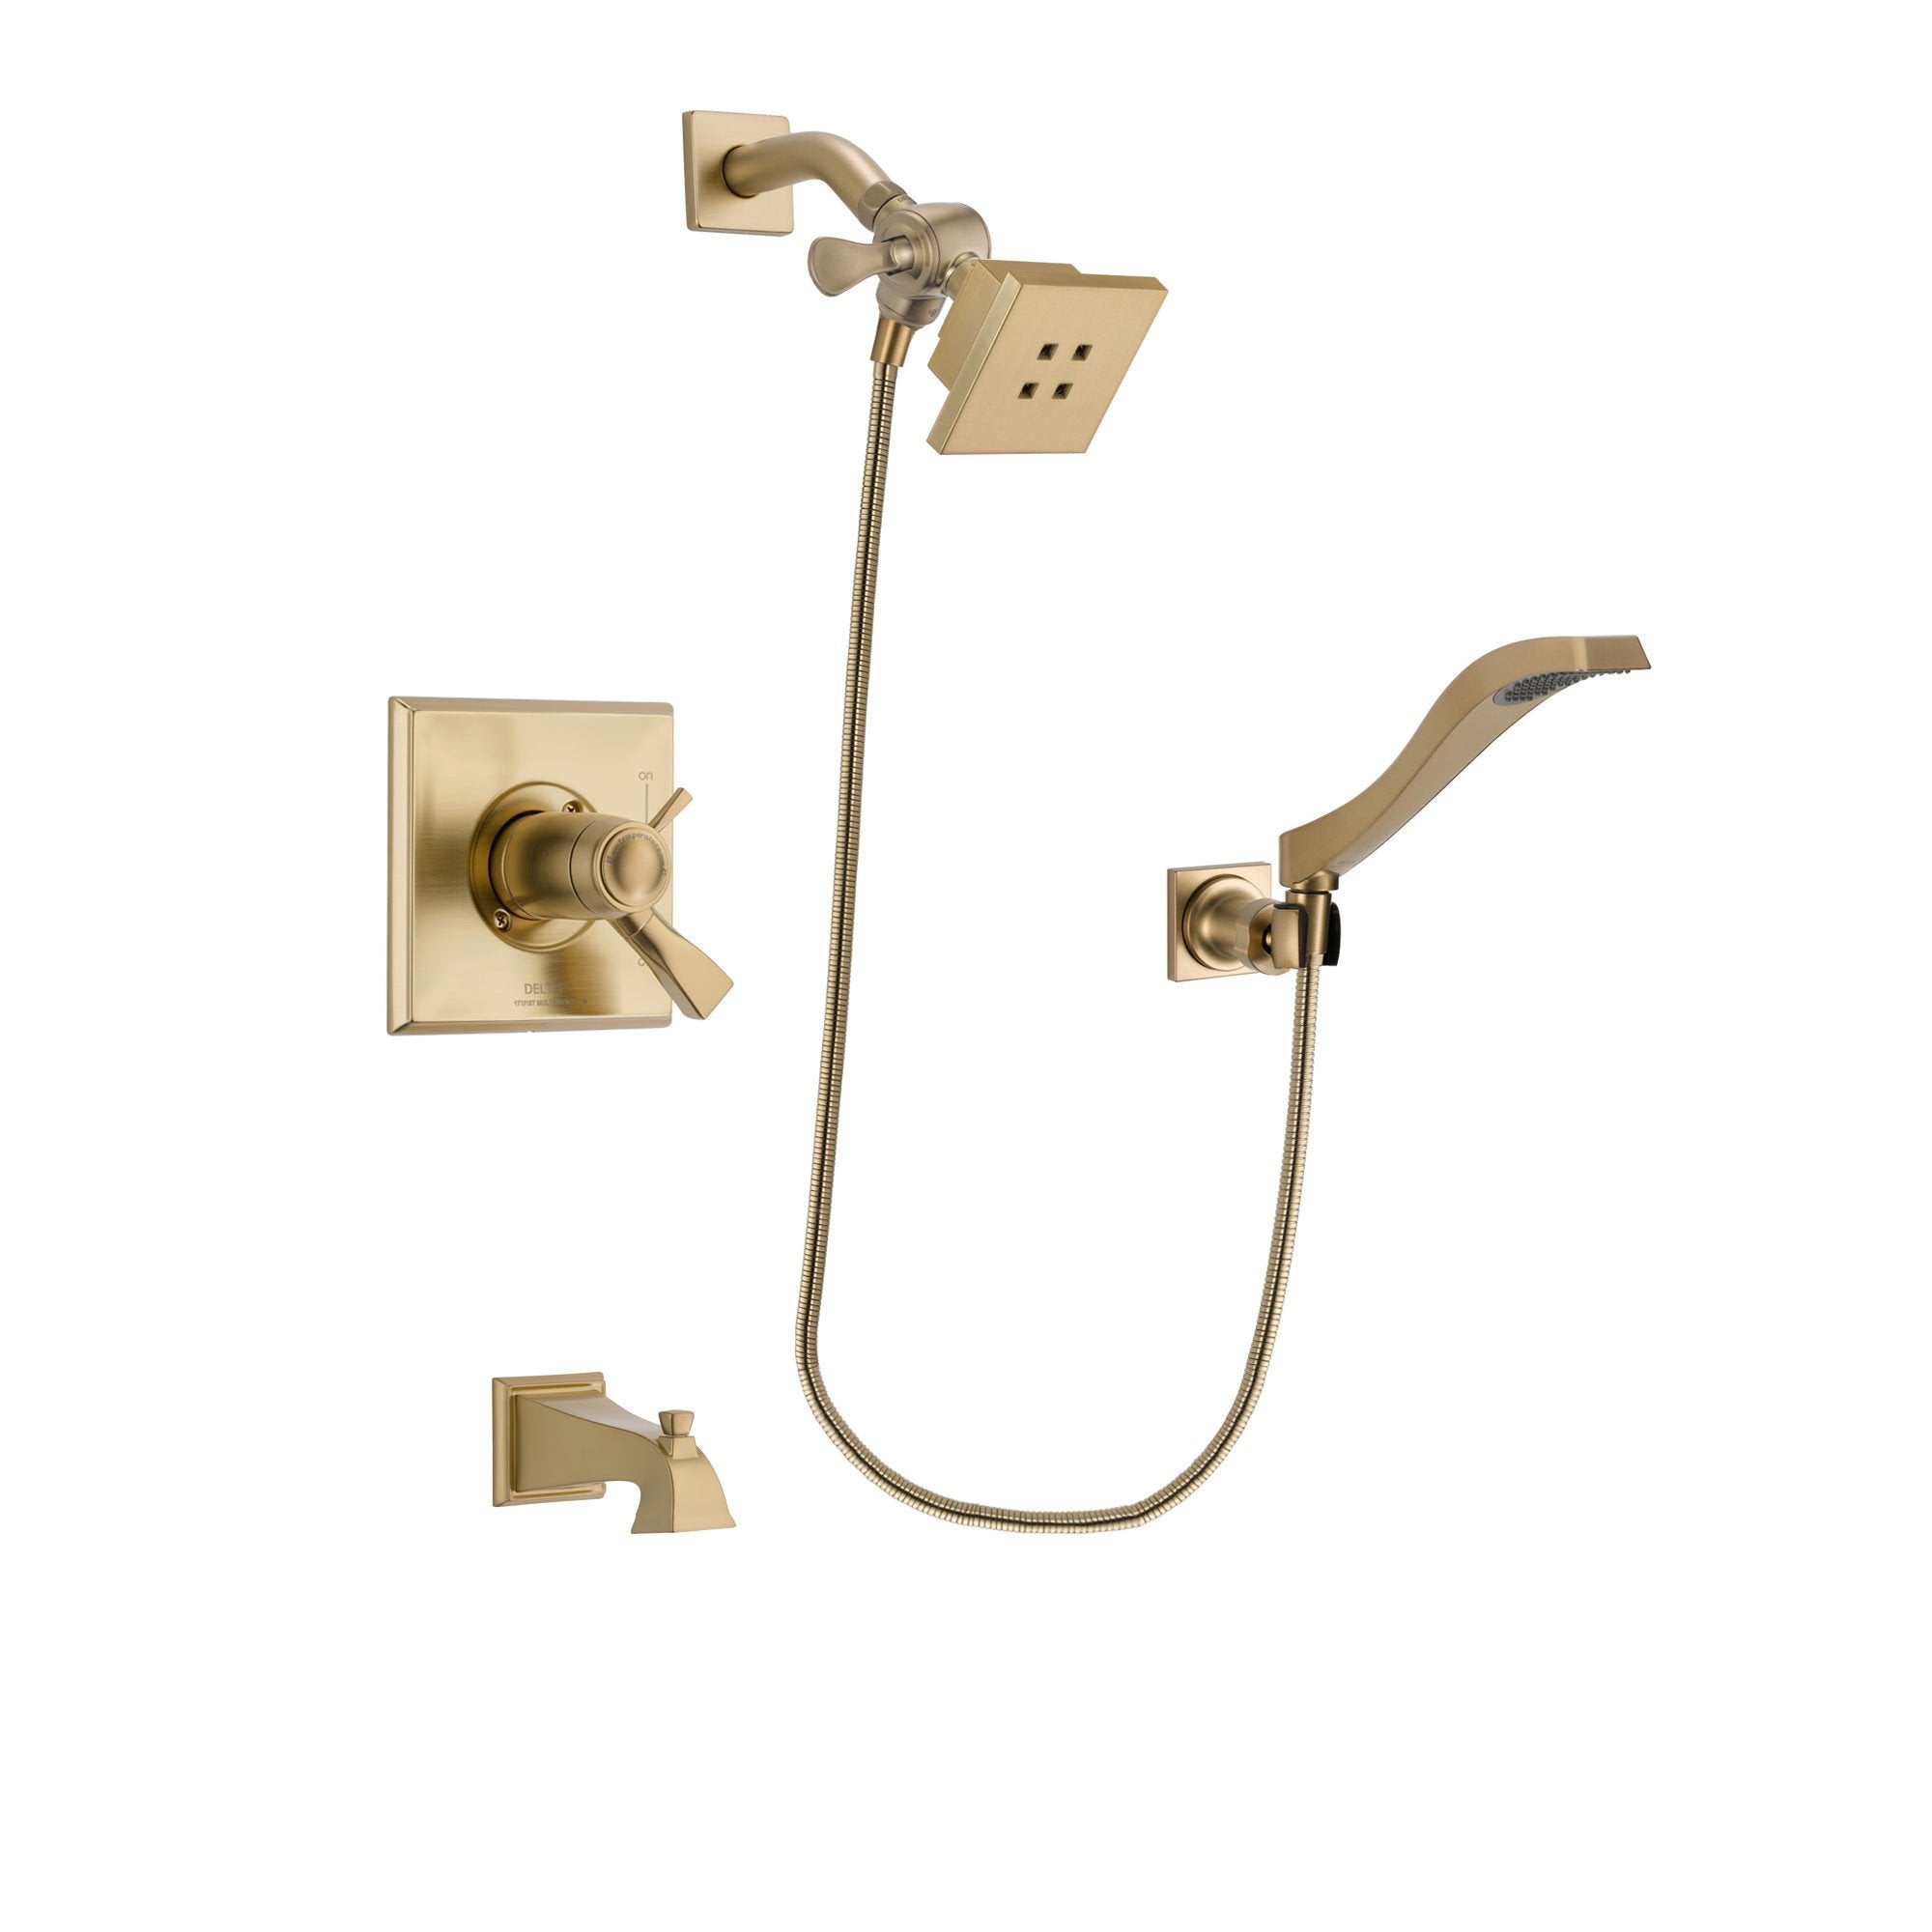 Delta Dryden Champagne Bronze Finish Thermostatic Tub and Shower Faucet System Package with Square Showerhead and Modern Wall Mount Handheld Shower Spray Includes Rough-in Valve and Tub Spout DSP3837V